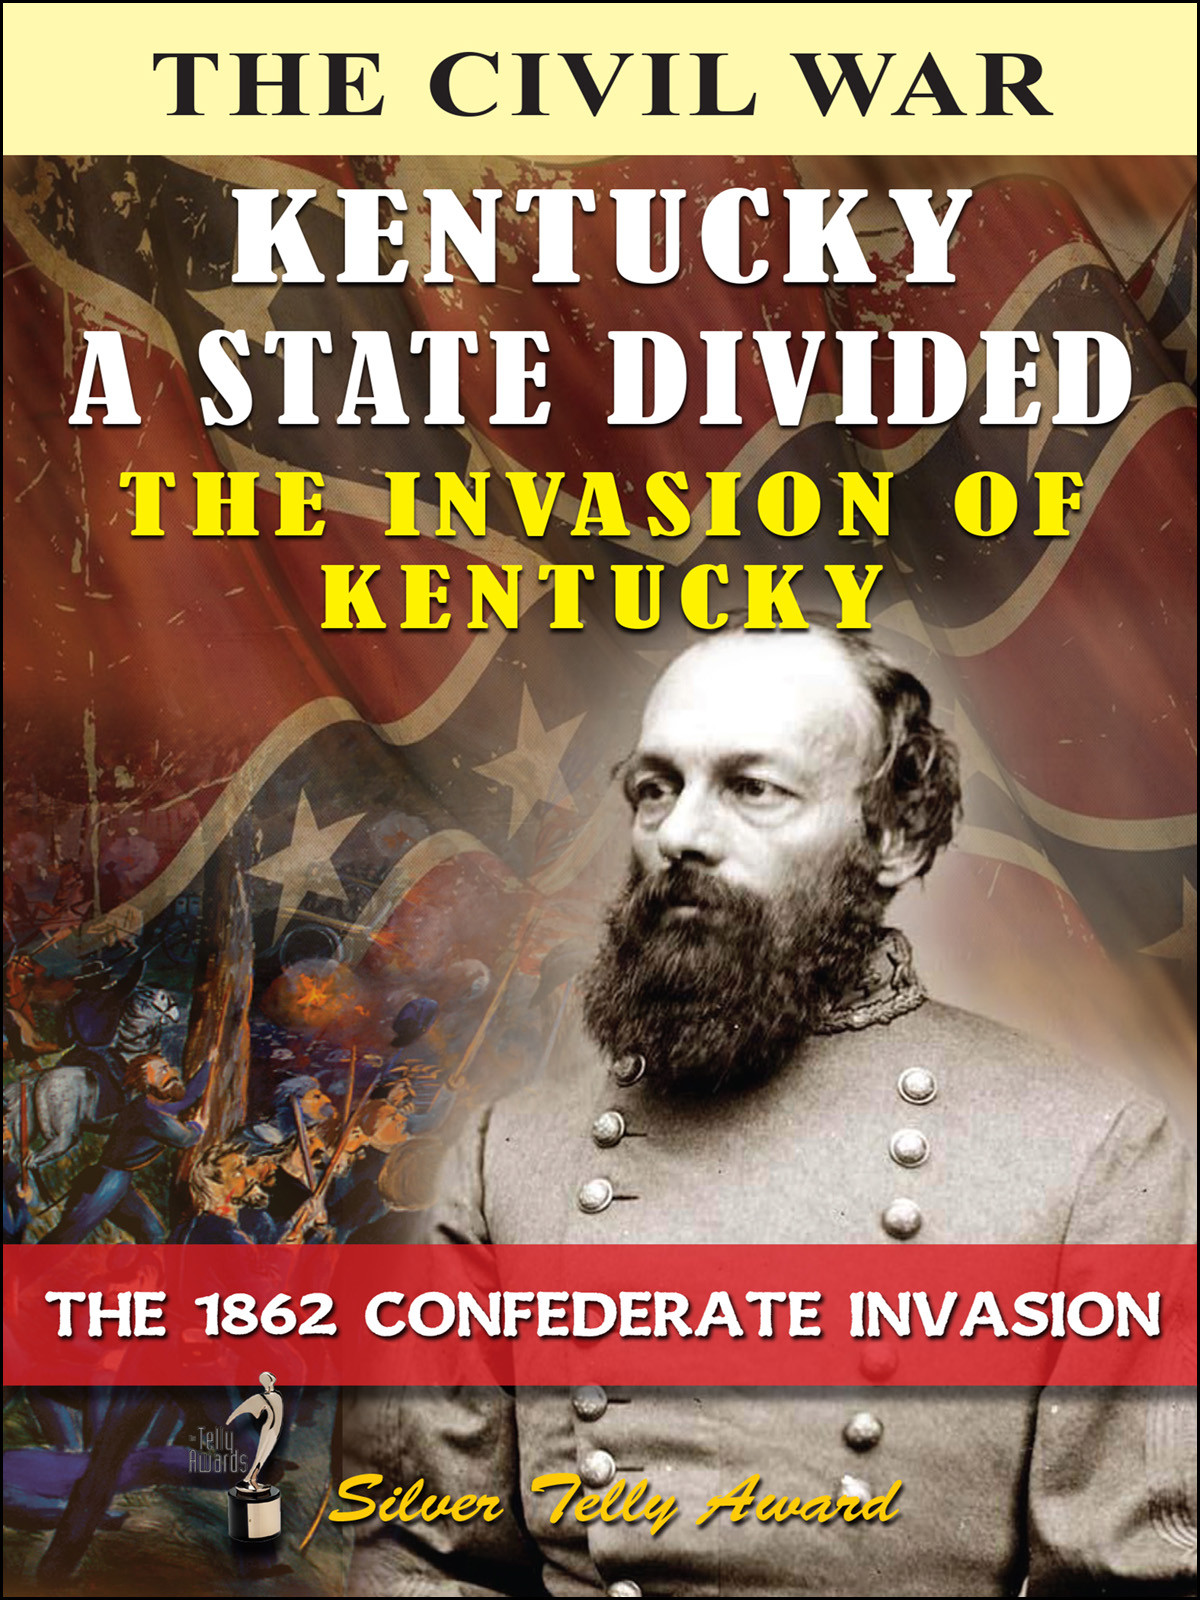 L4837 - Kentucky a State Divided The Invasion of Kentucky